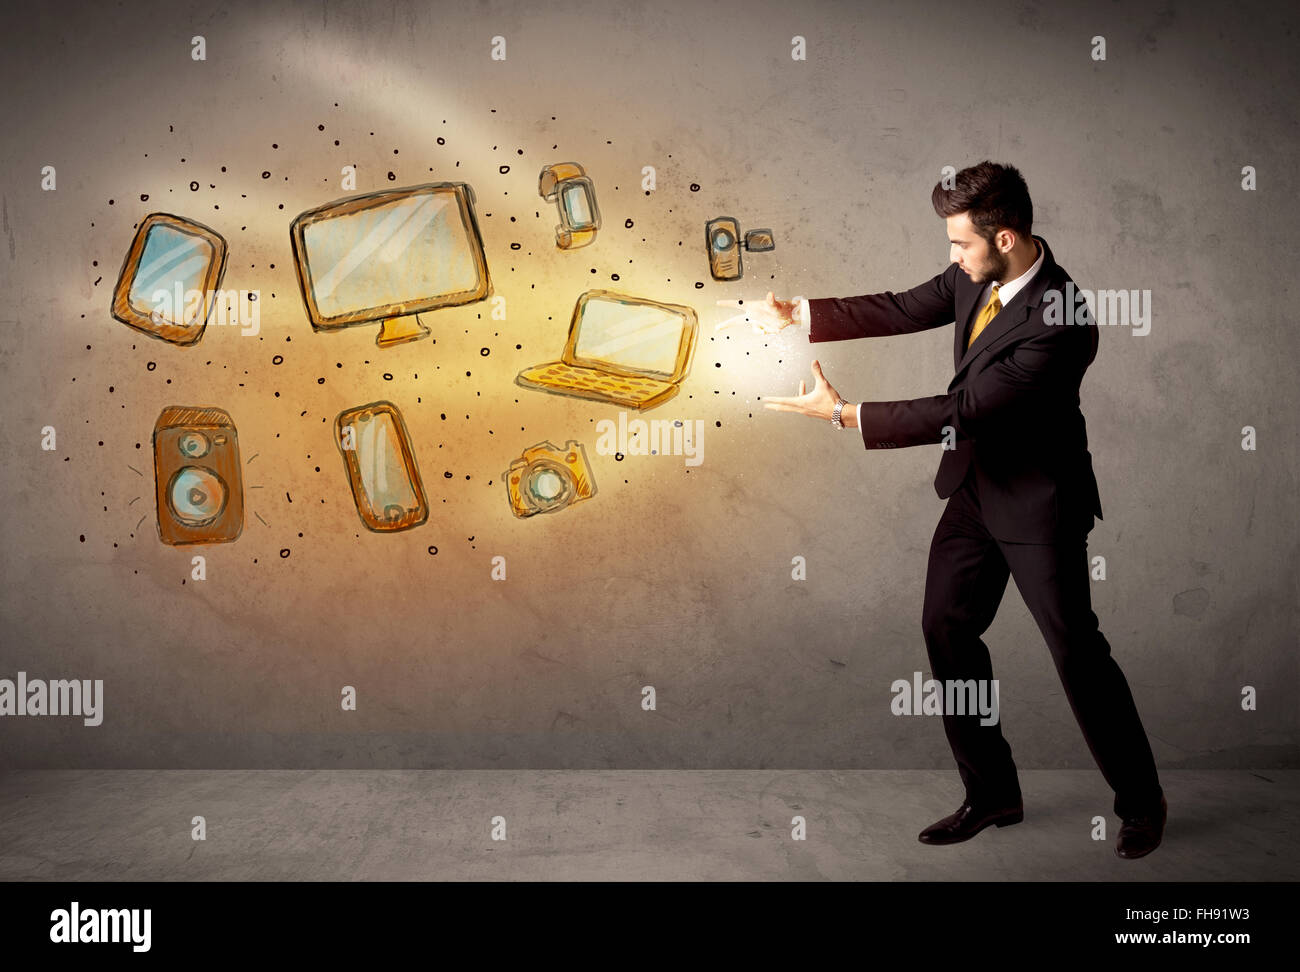 Man throwing hand drawn electronical devices Stock Photo